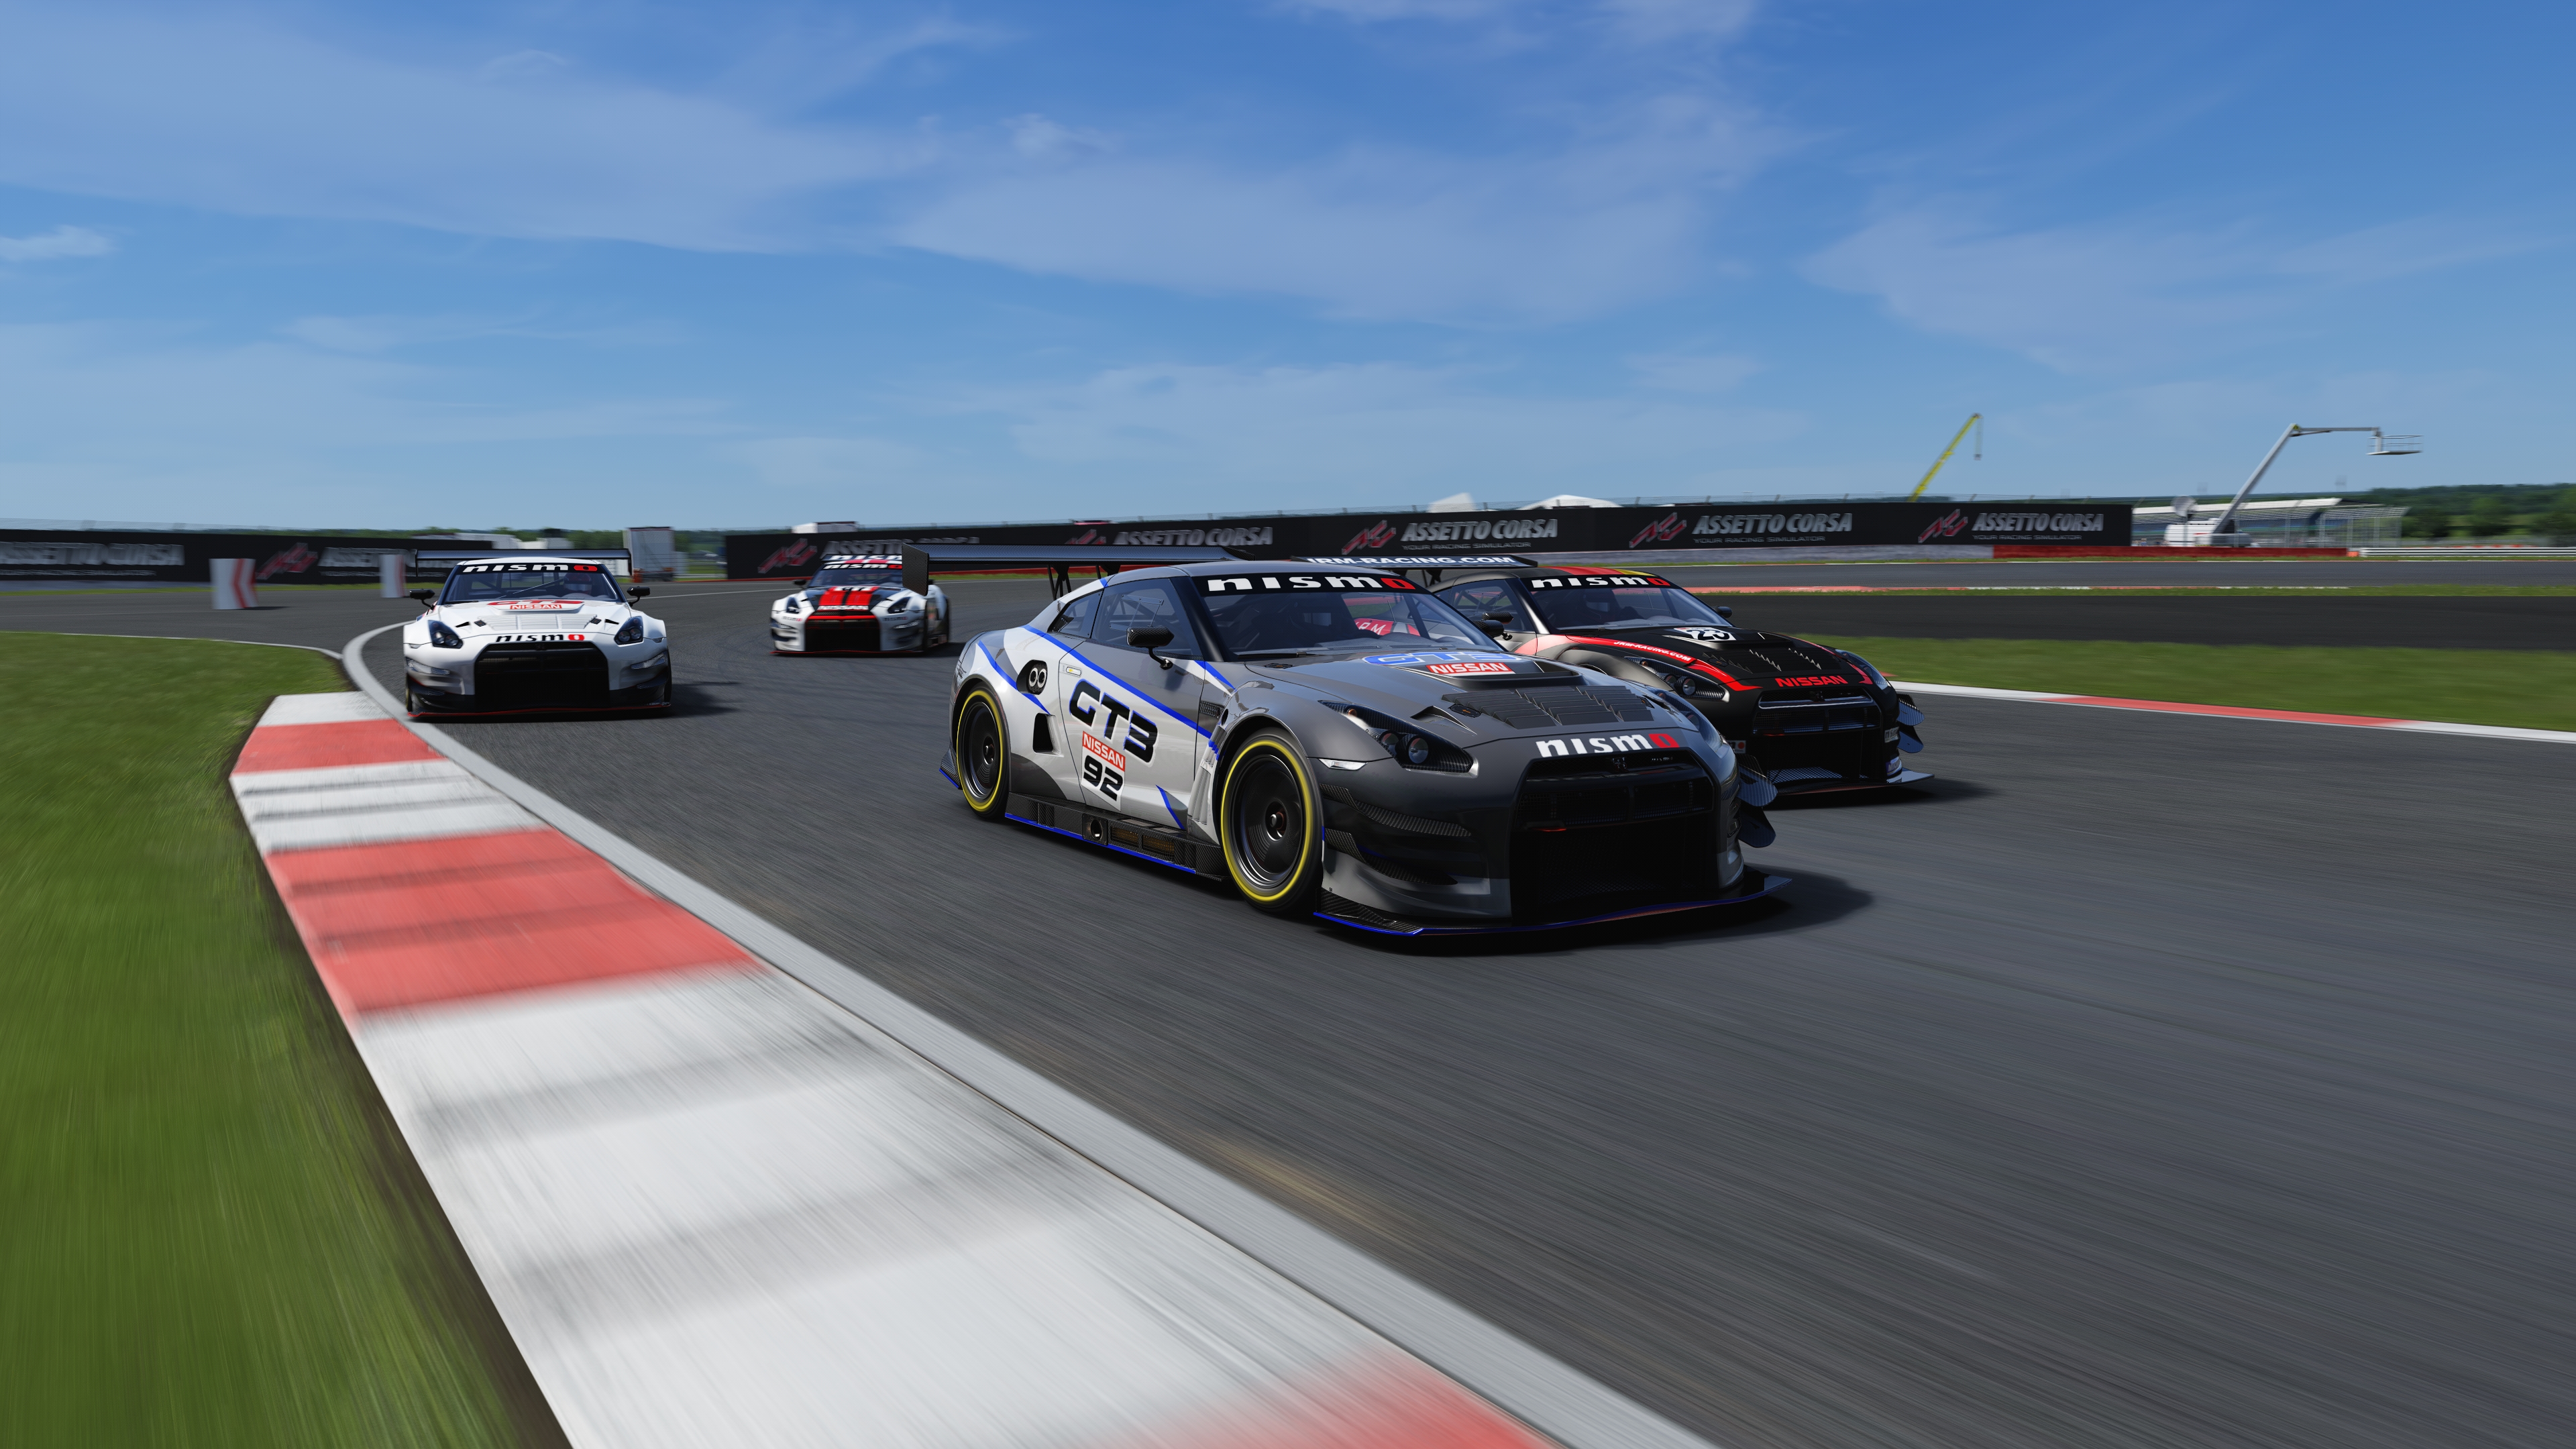 GT3 Racing Nissan GT R Nissan GT R NiSMO Silverstone Assetto Corsa Front Angle View CGi Car Race Car 3840x2160